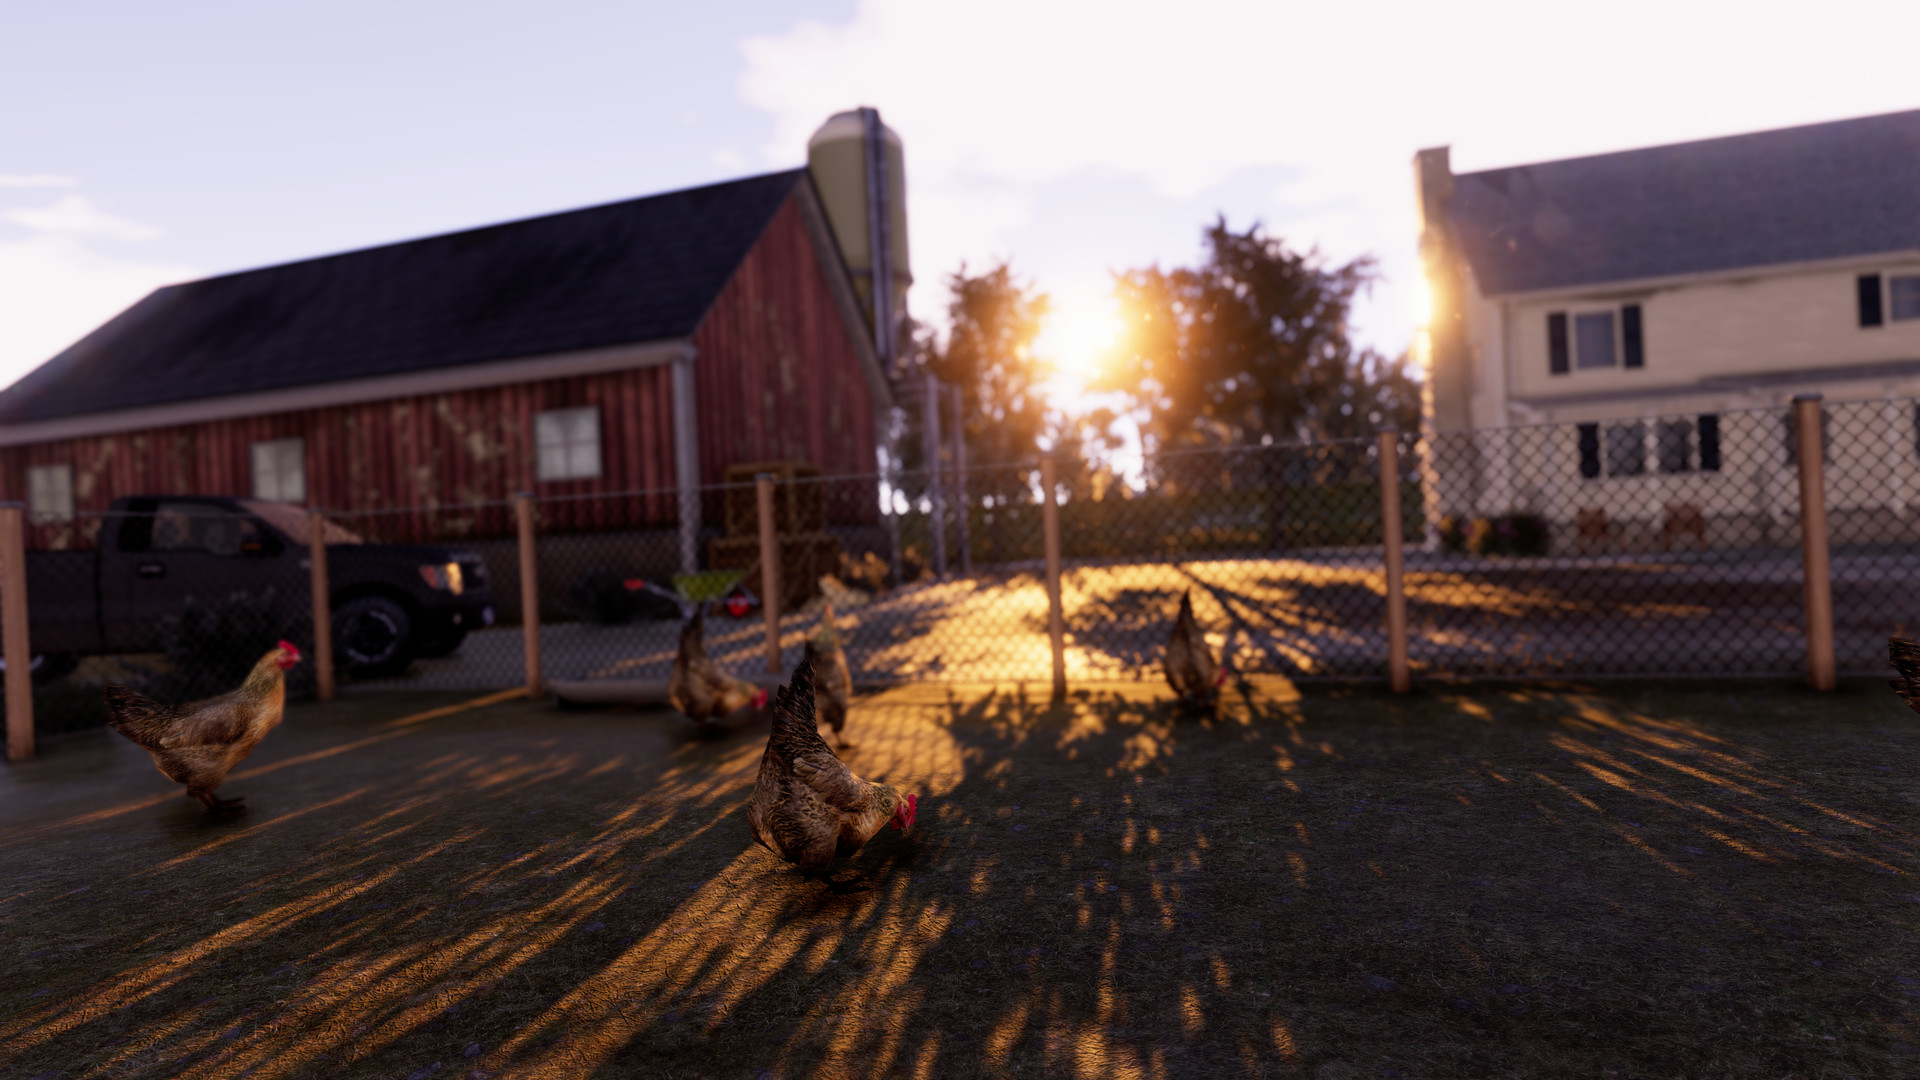 free farm game for pc